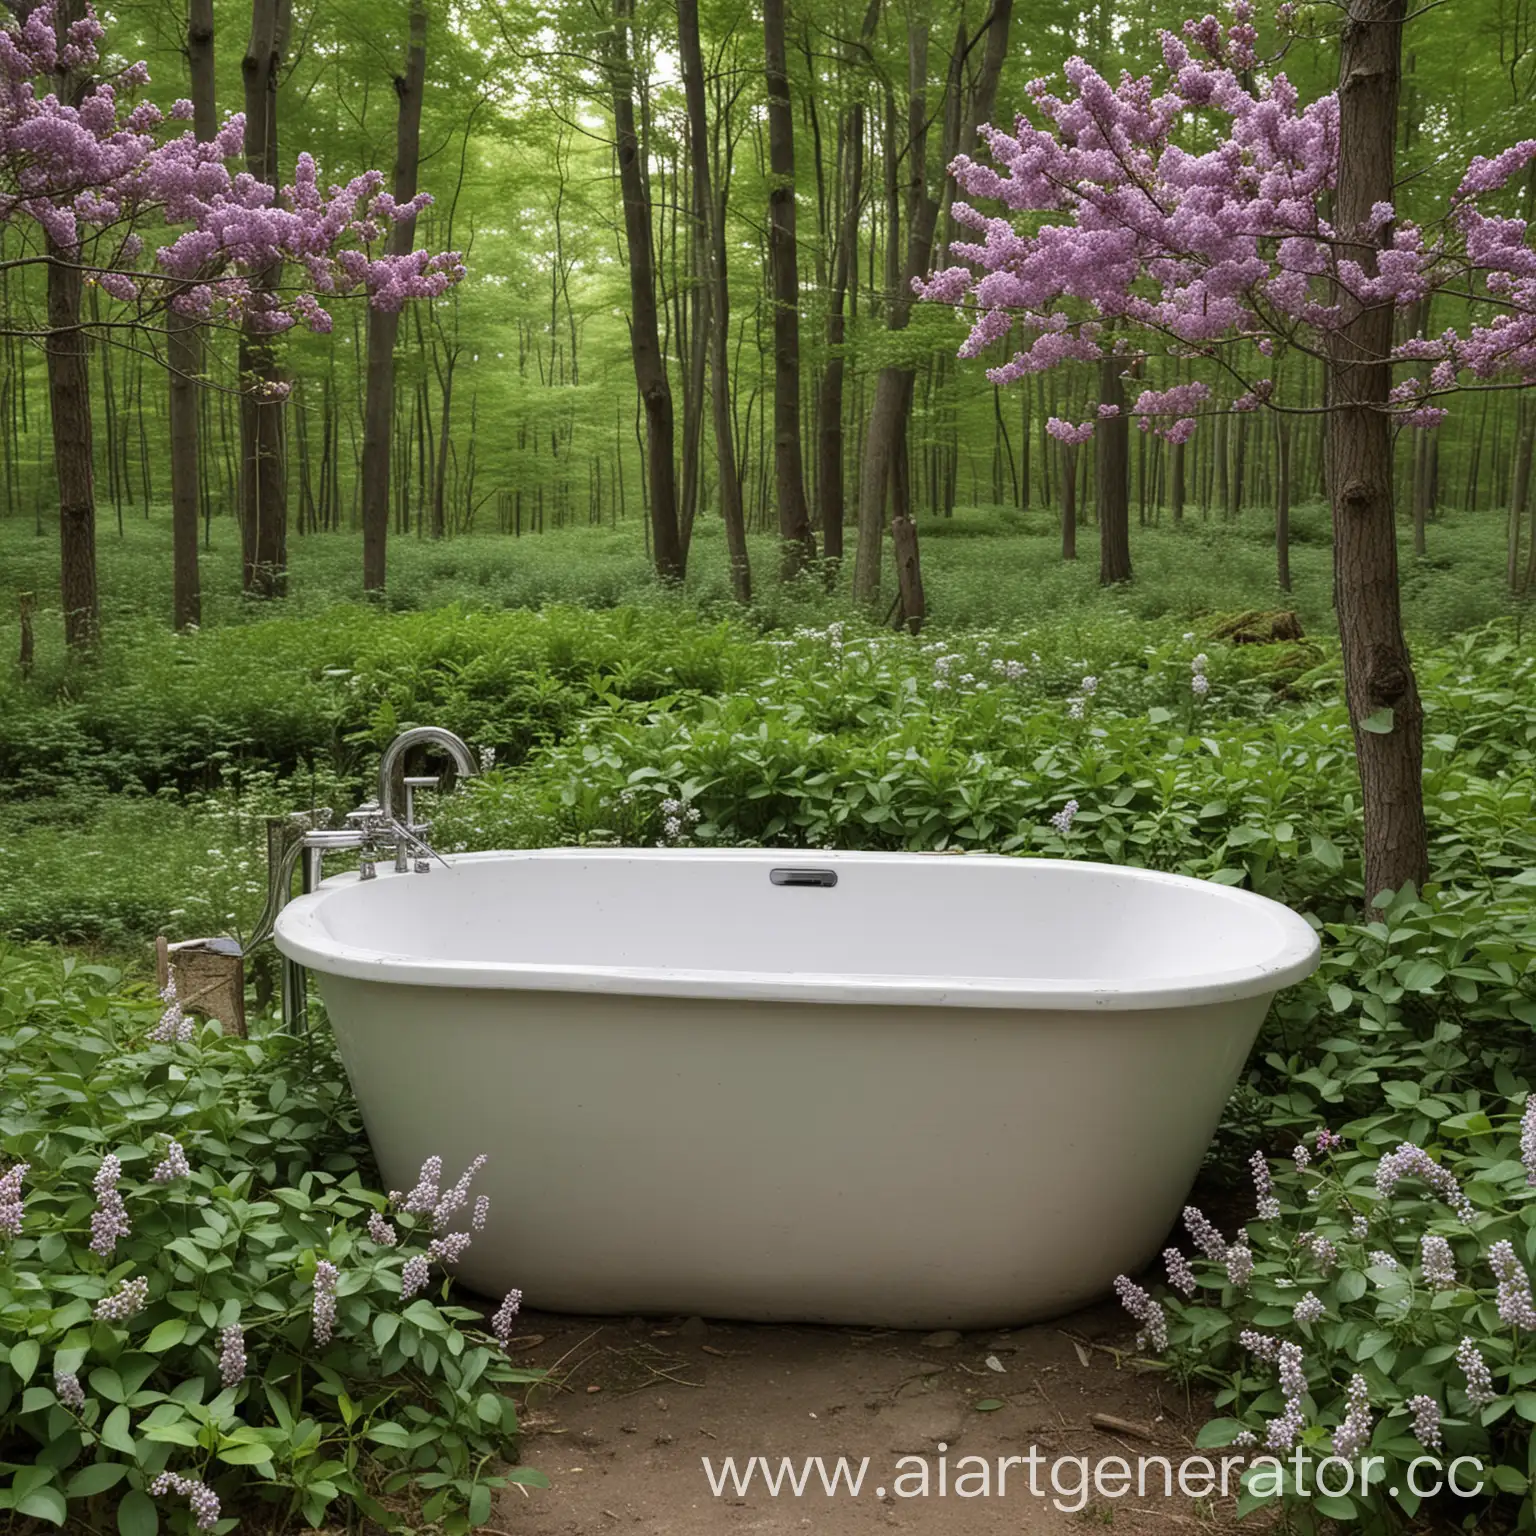 Tranquil-Forest-Scene-with-Oval-Bathtub-and-Lilacs